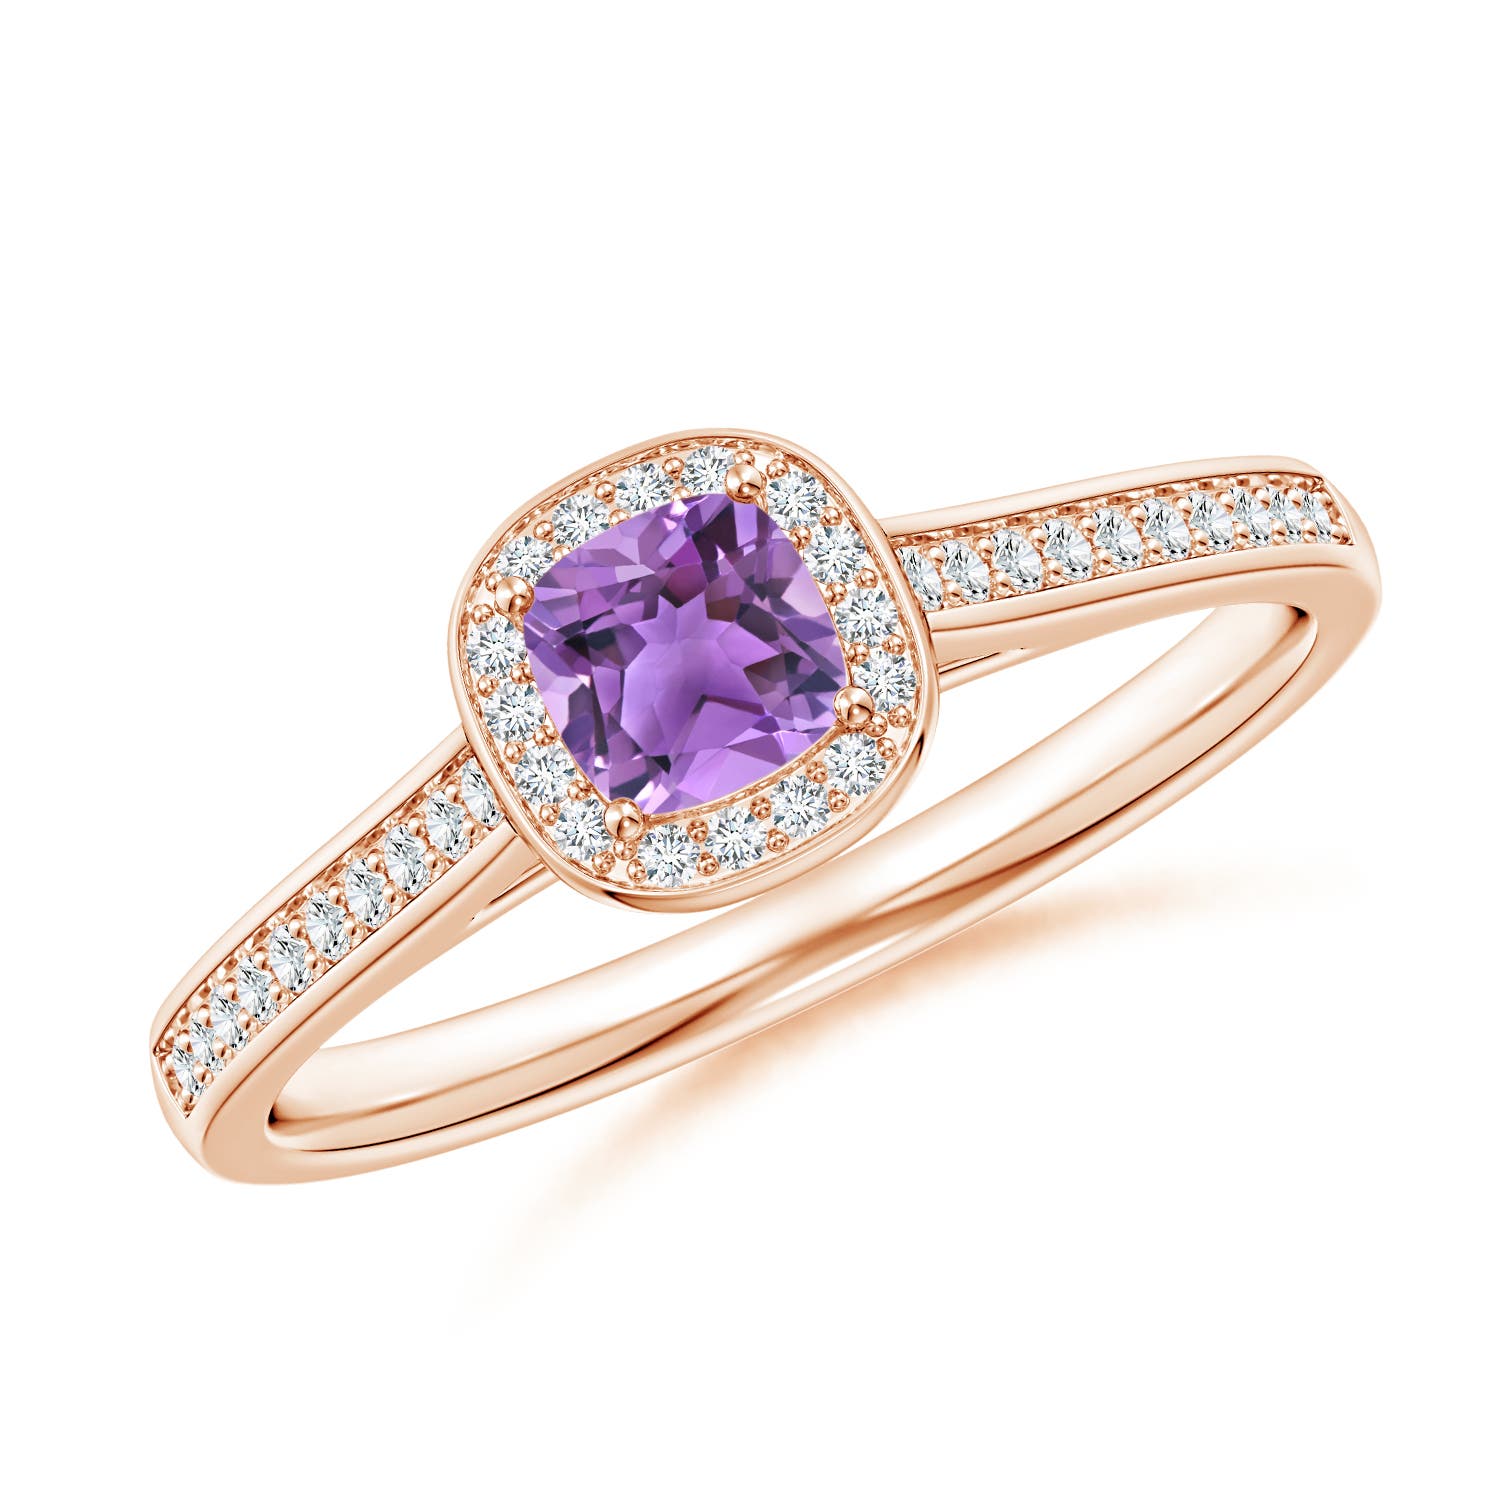 AA - Amethyst / 0.49 CT / 14 KT Rose Gold